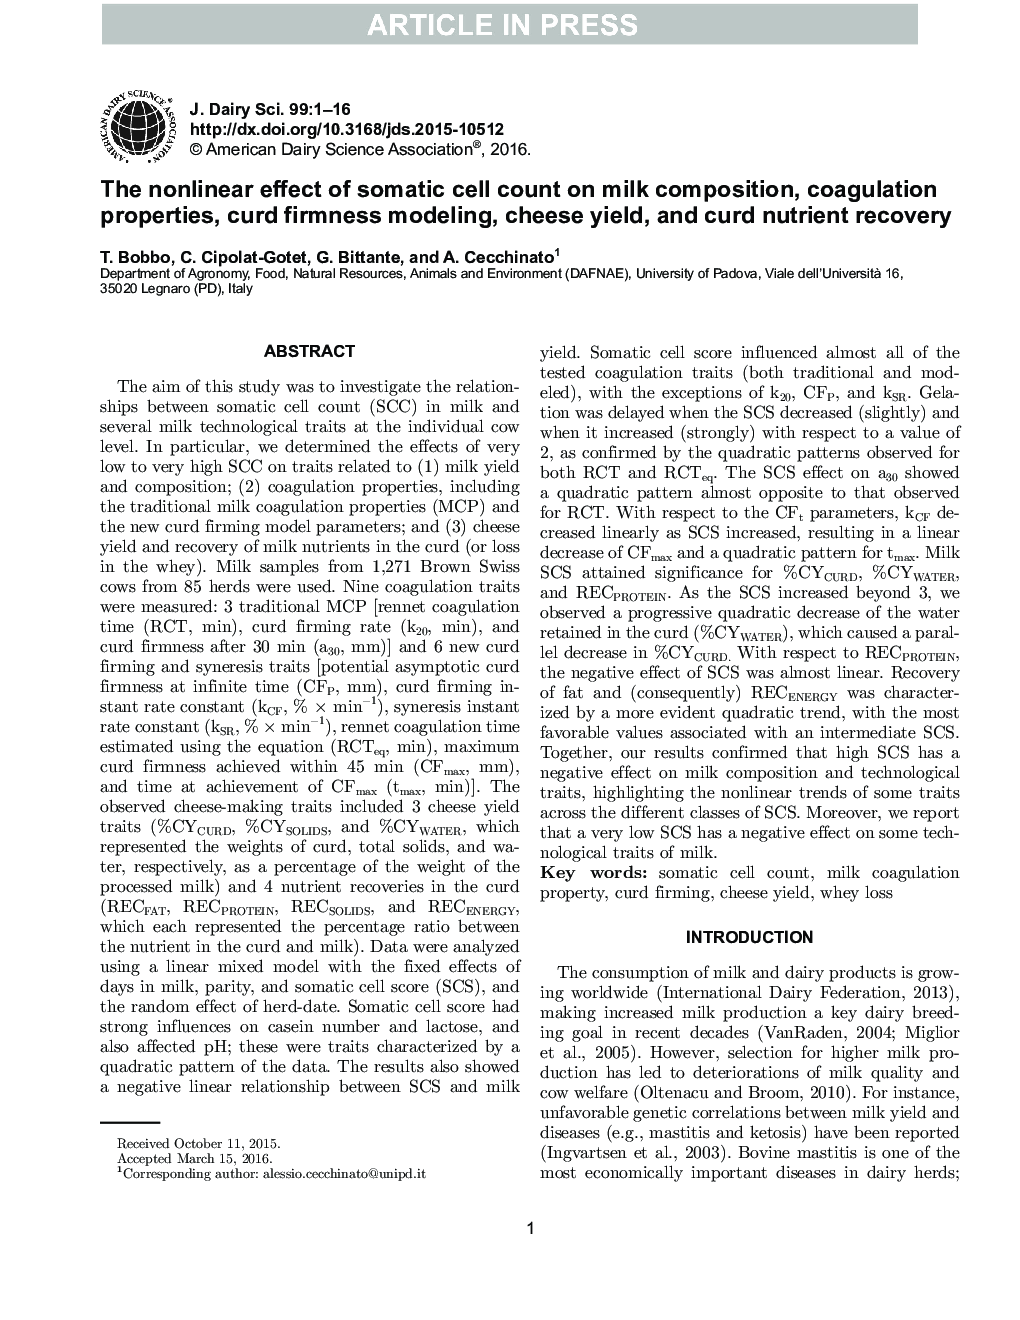 The nonlinear effect of somatic cell count on milk composition, coagulation properties, curd firmness modeling, cheese yield, and curd nutrient recovery